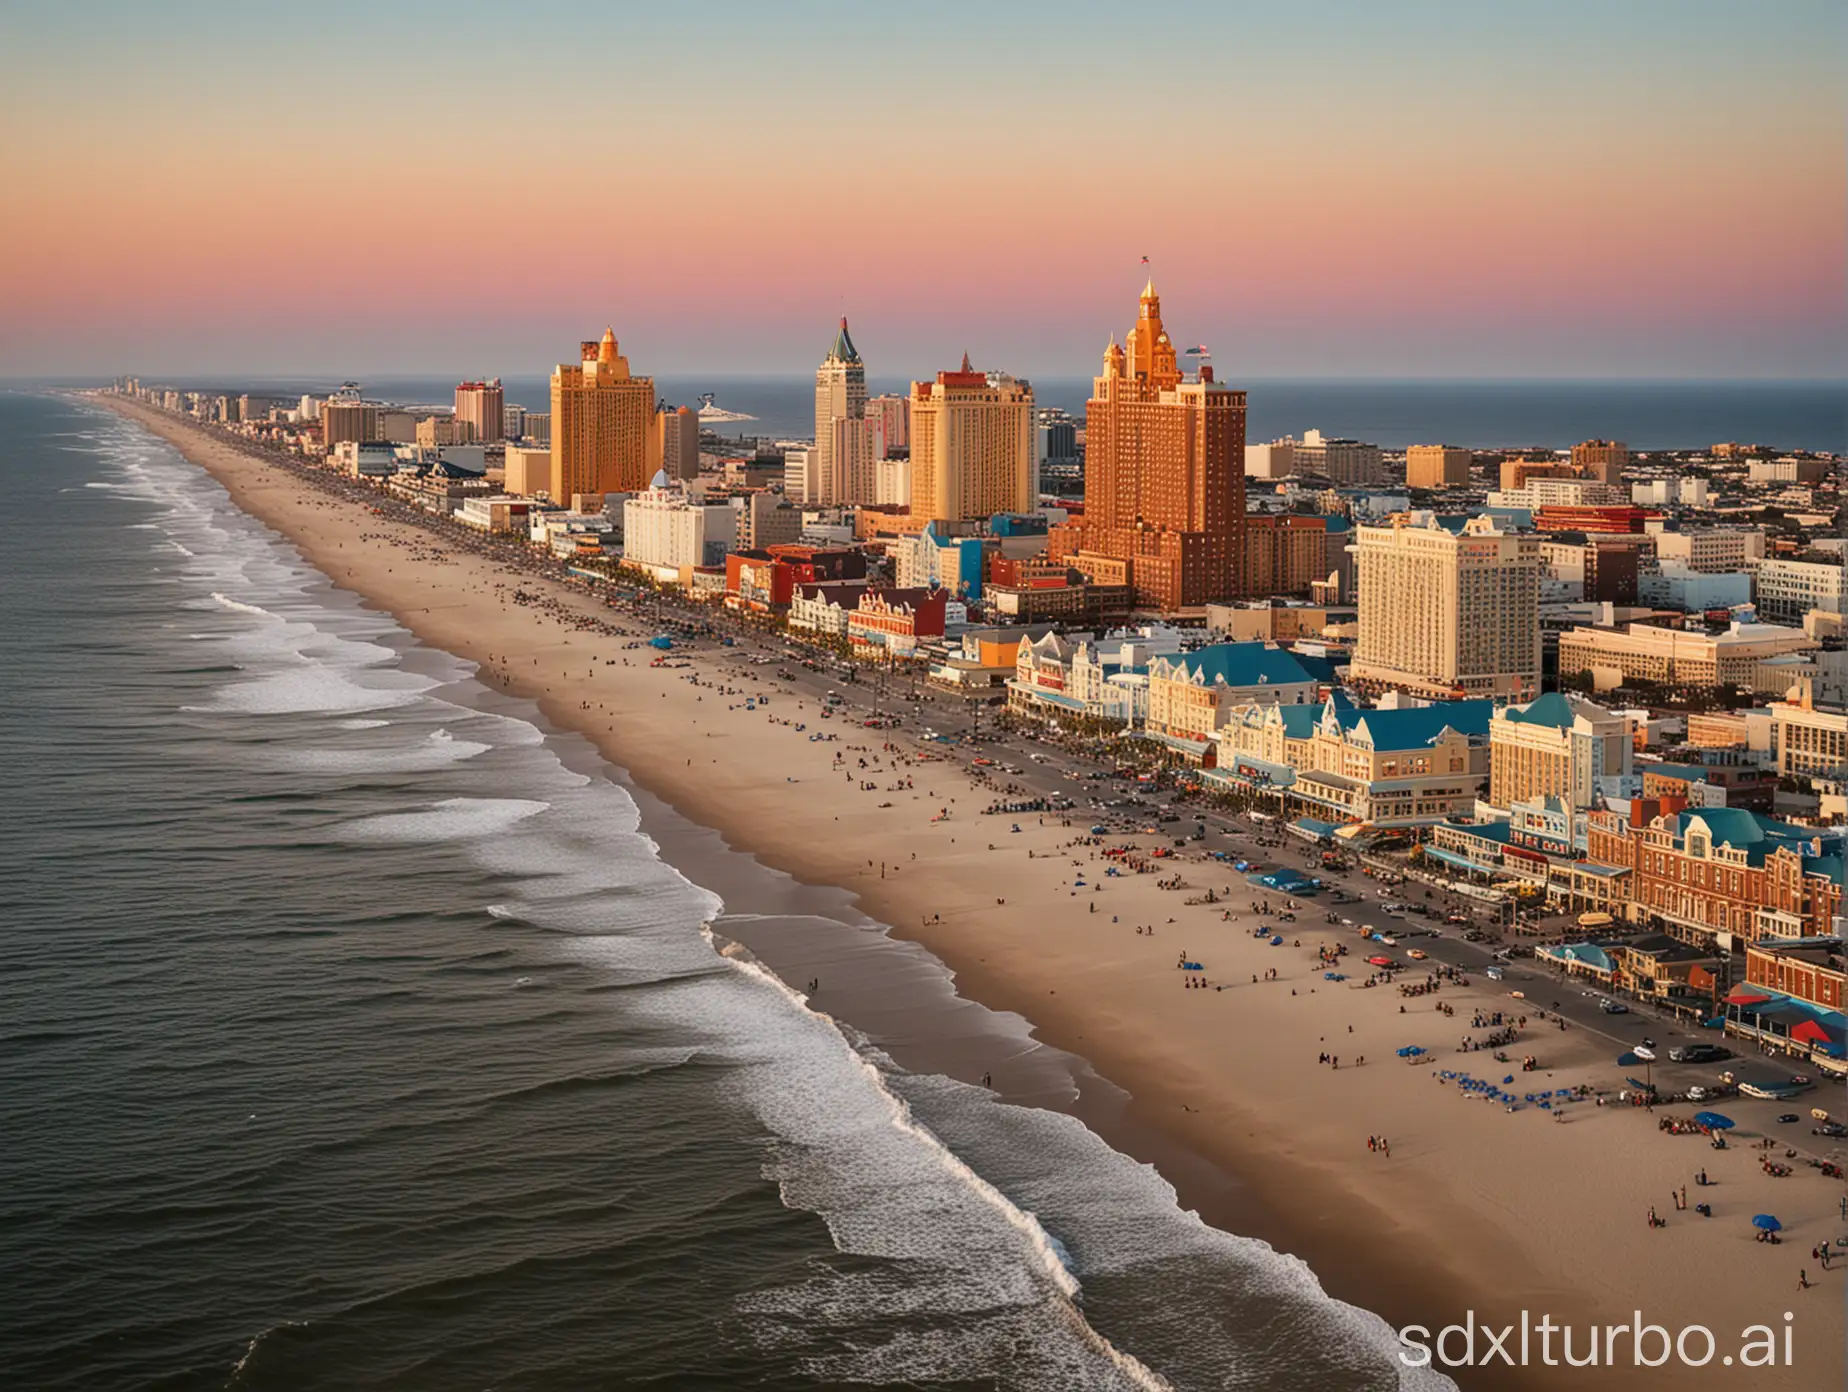 Sunset-Over-Atlantic-City-Boardwalk-Vibrant-Coastal-Scene-with-Neon-Lights-and-Diverse-Crowds